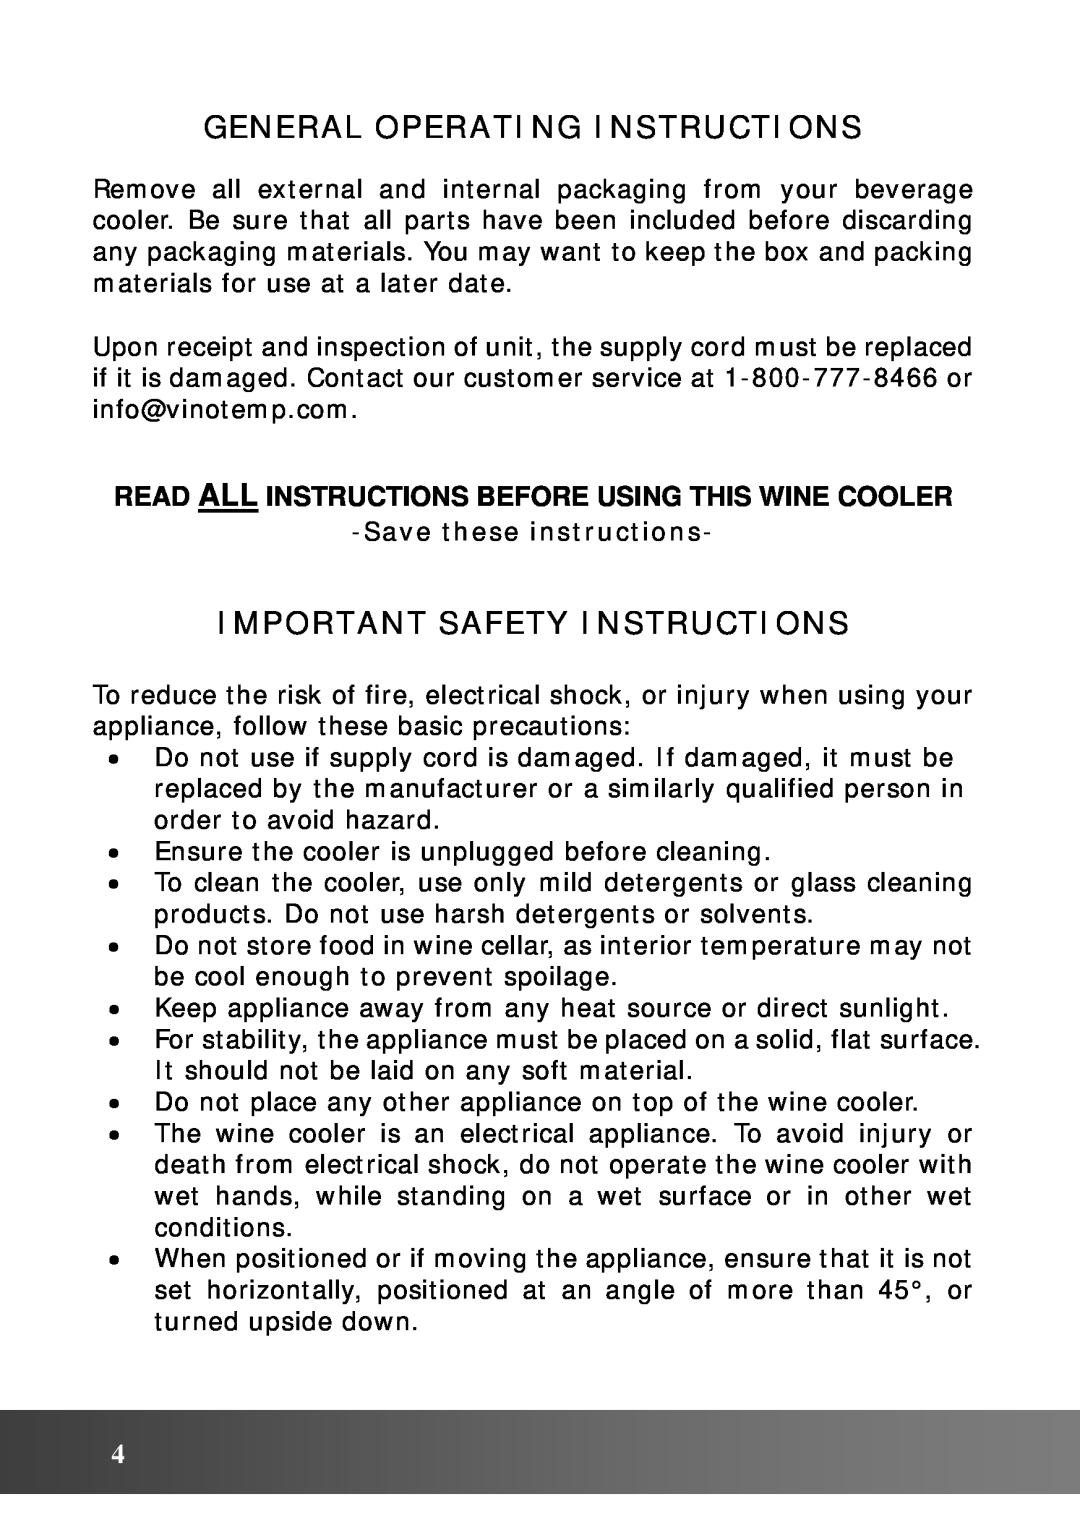 Vinotemp VT48TEDS2Z owner manual General Operating Instructions, Important Safety Instructions, Savethese instructions 